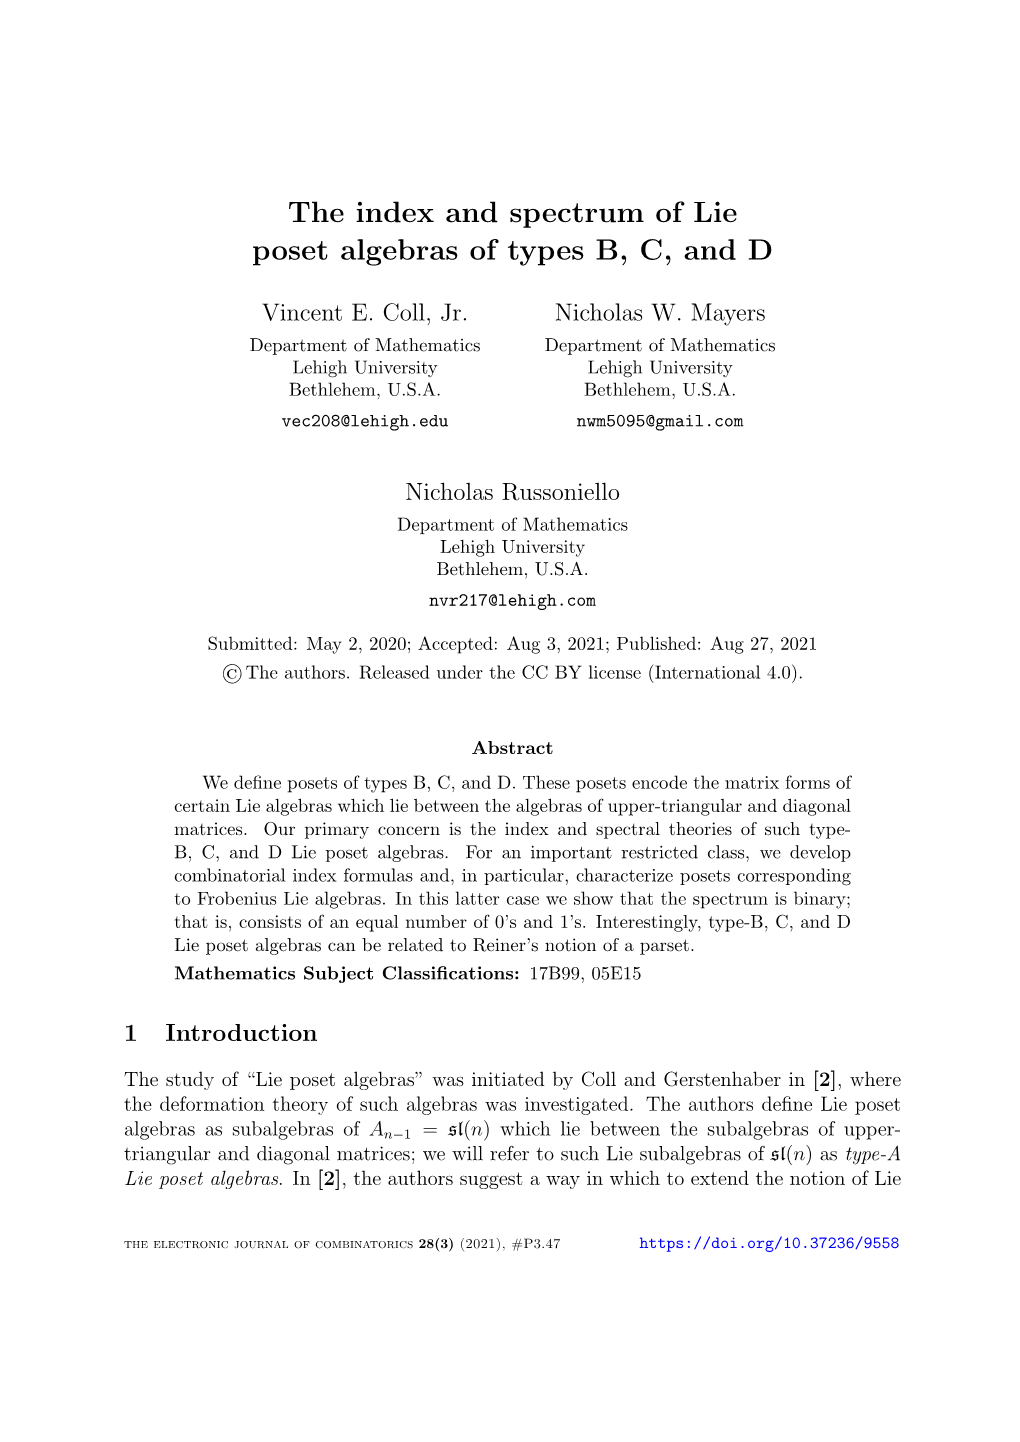 The Index and Spectrum of Lie Poset Algebras of Types B, C, and D